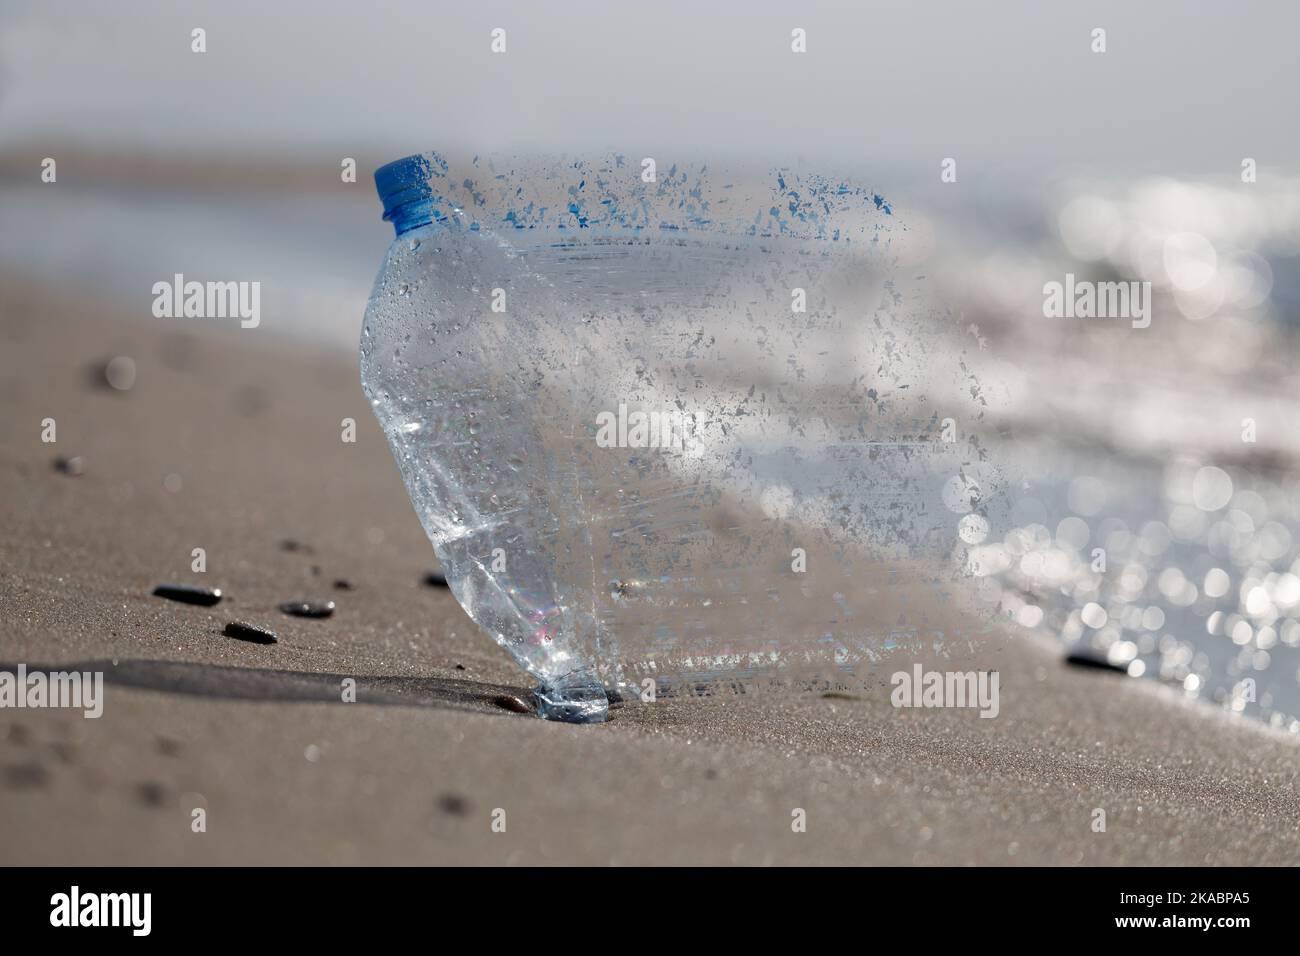 The problem of micro plastic pollution, conceptual image. Plastic bottle on the beach absorbed by the ocean. Stock Photo